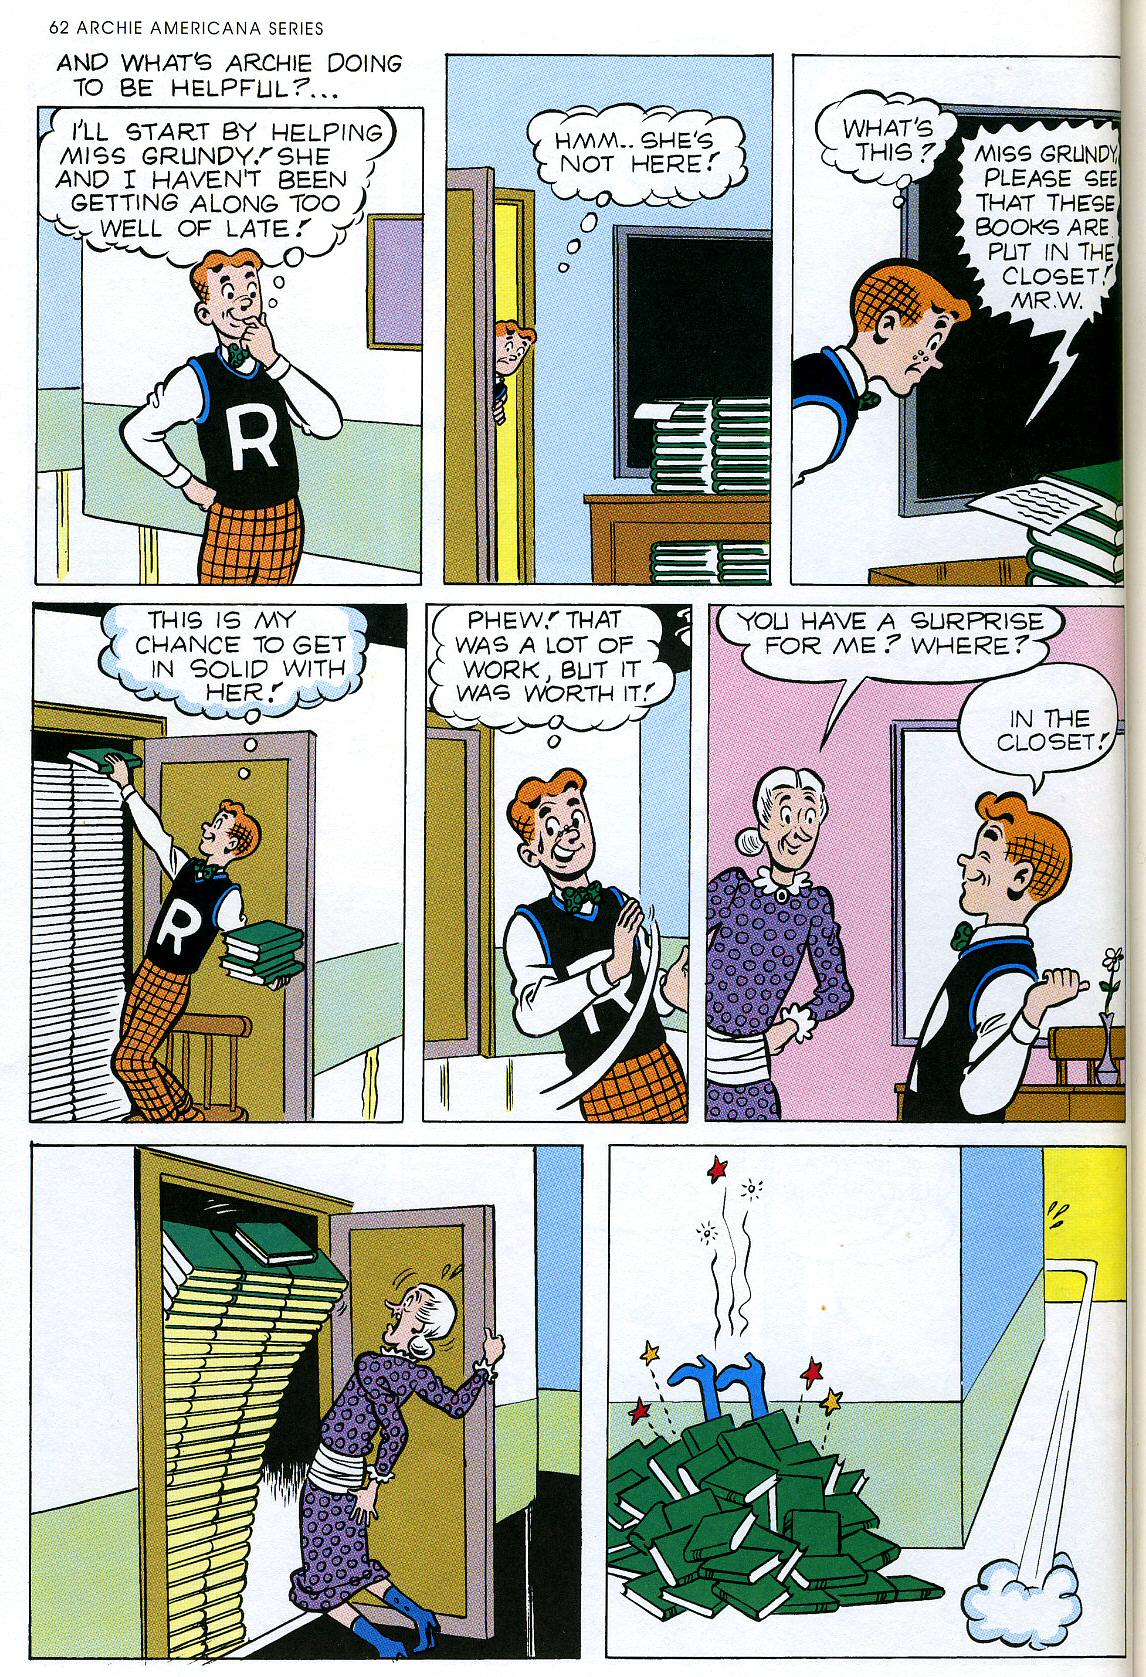 Read online Archie Americana Series comic -  Issue # TPB 2 - 64